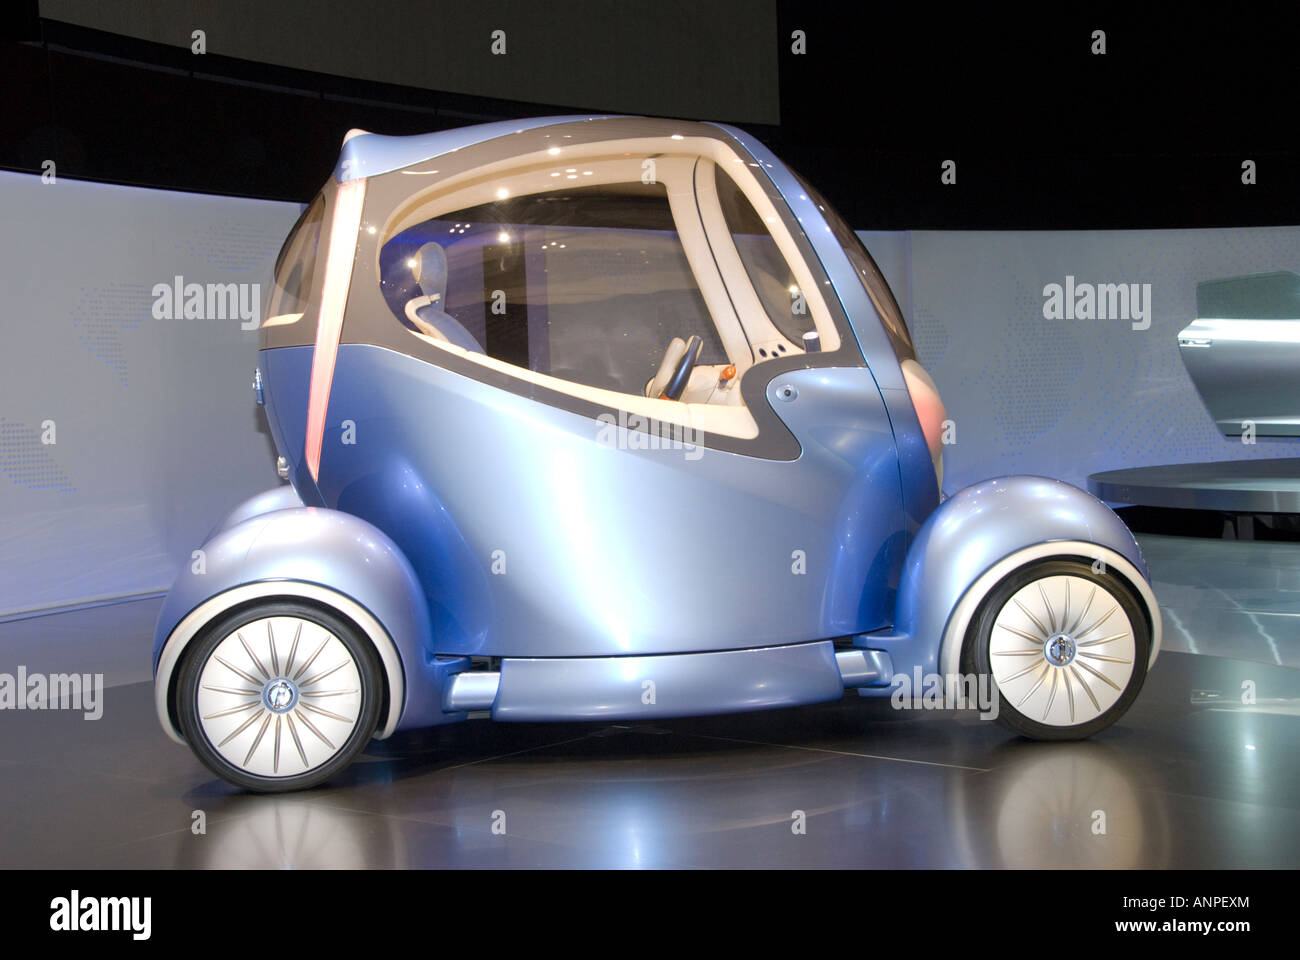 Prototype Nissan PIVO 2 electric vehicle on display at Tokyo motor Show 2007 Stock Photo